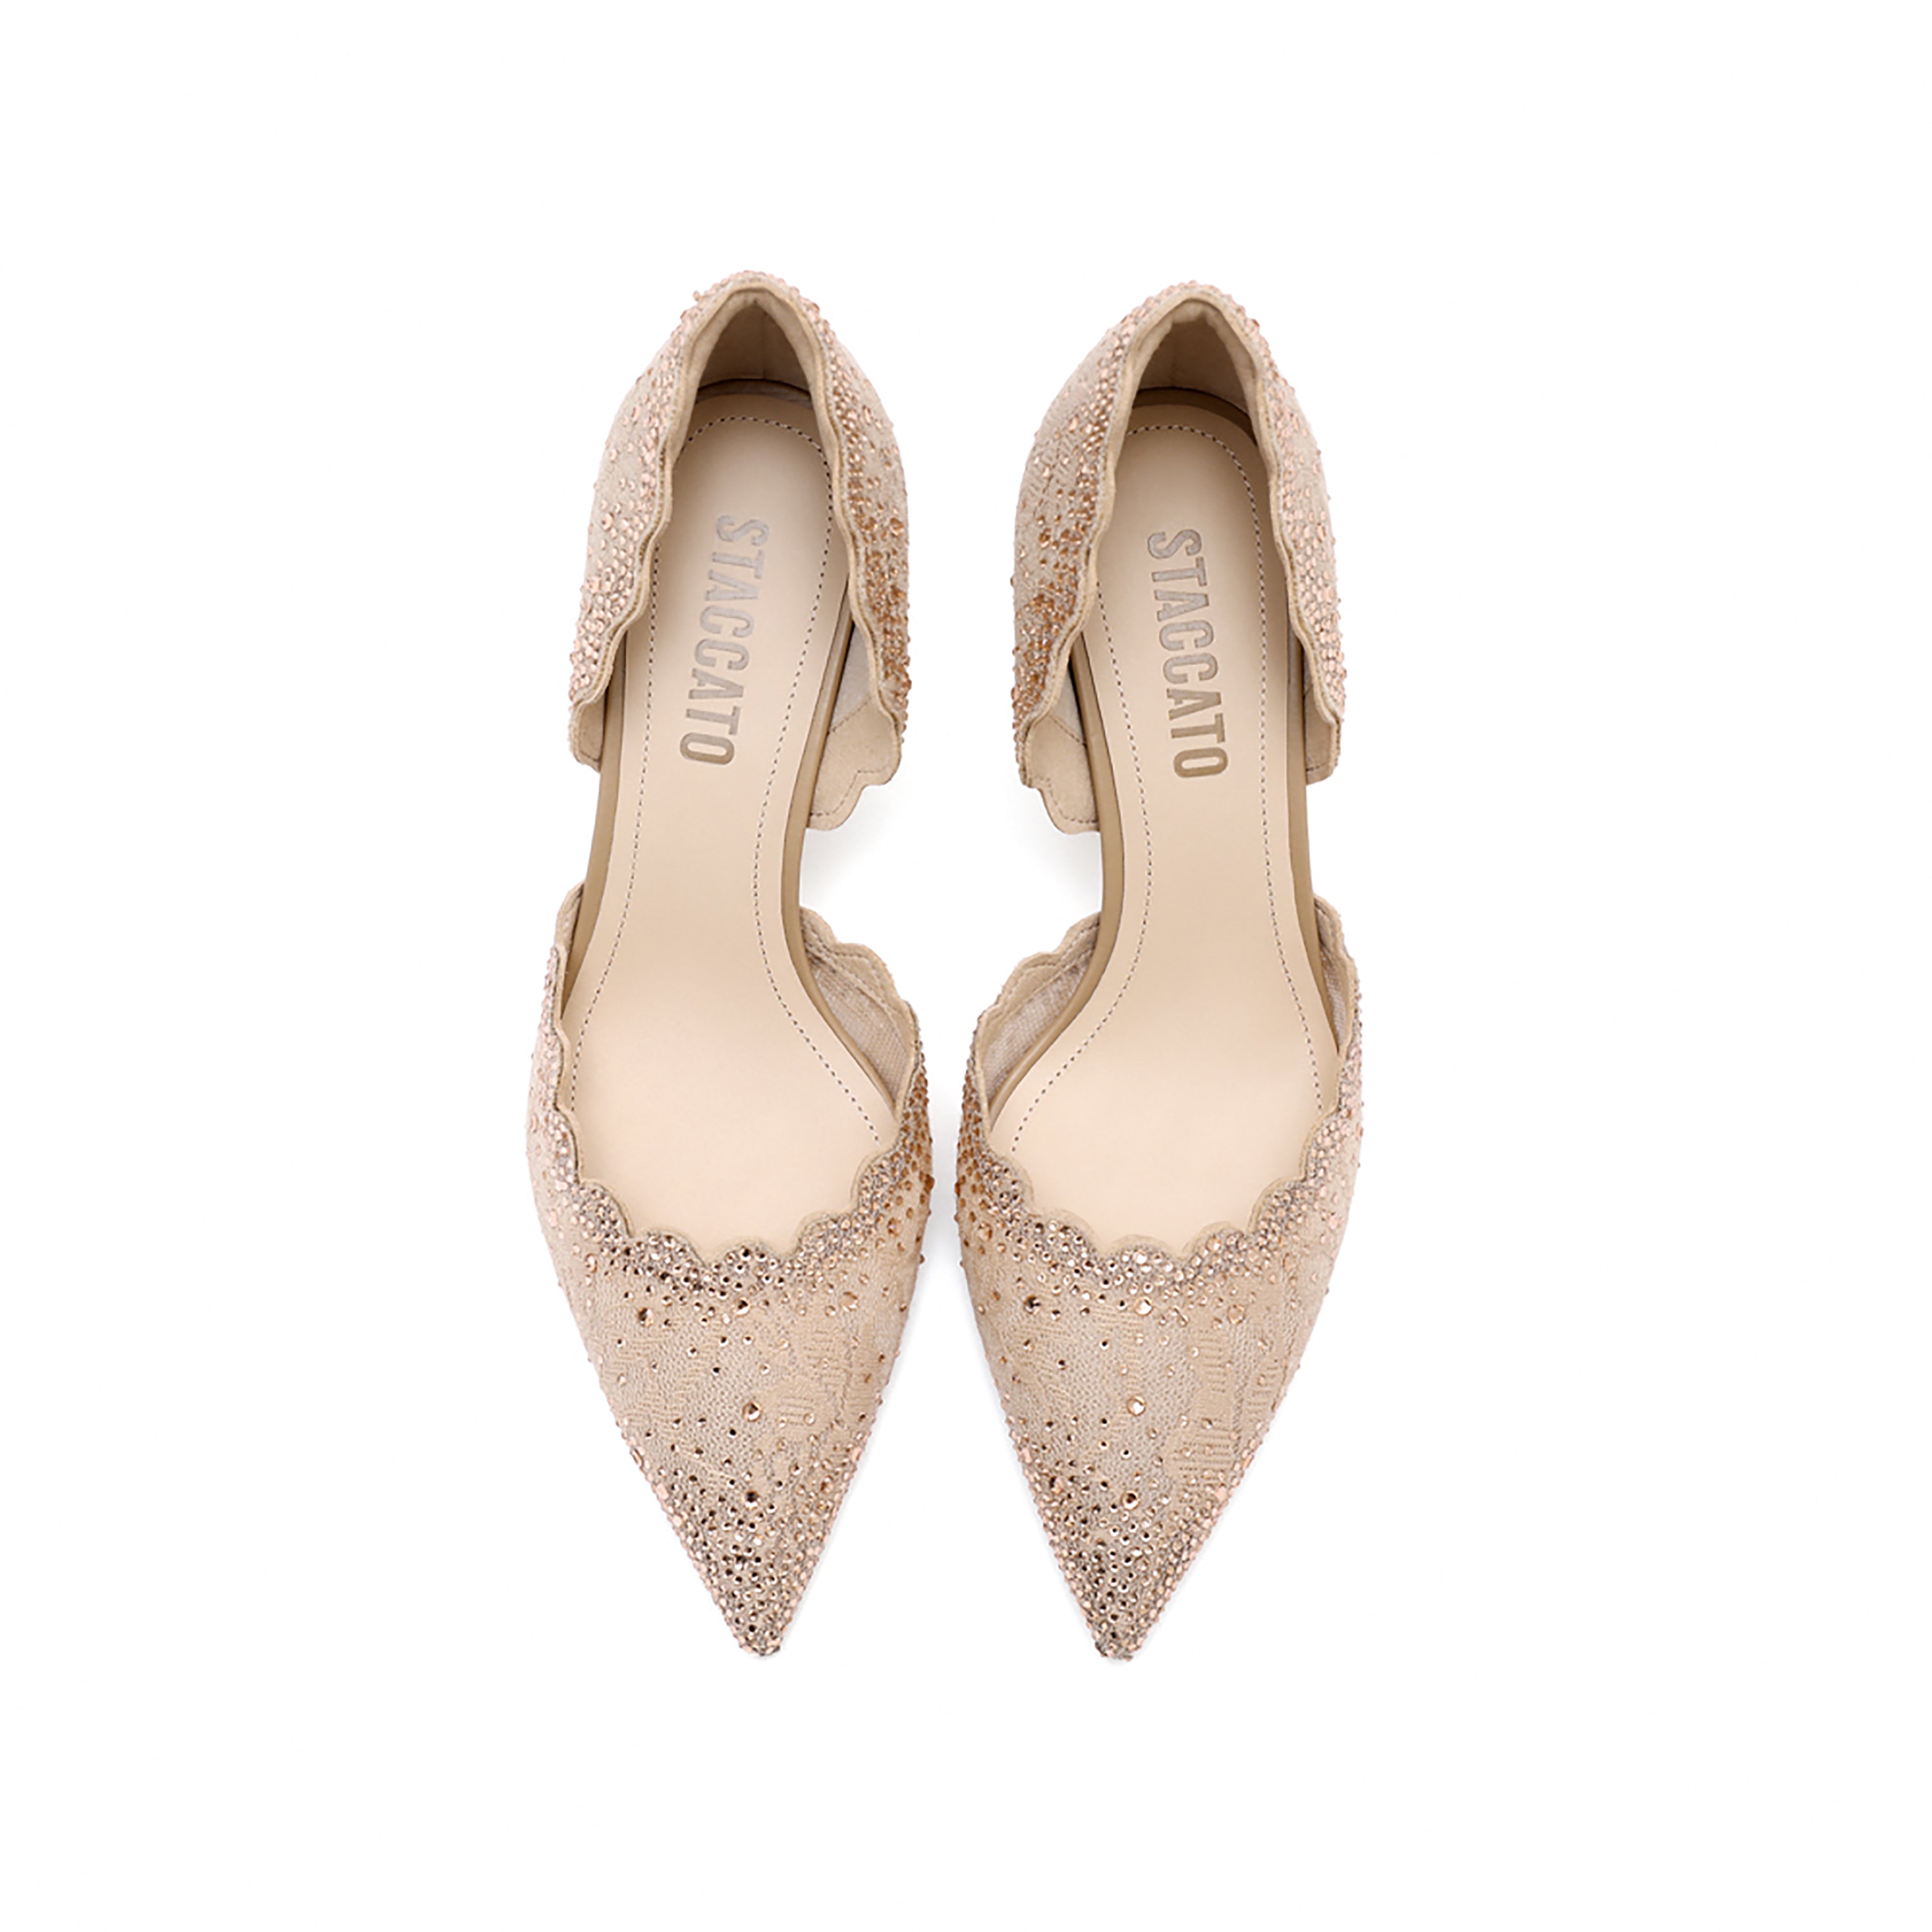 Taupe Crystal Lace D'Orsay Pumps